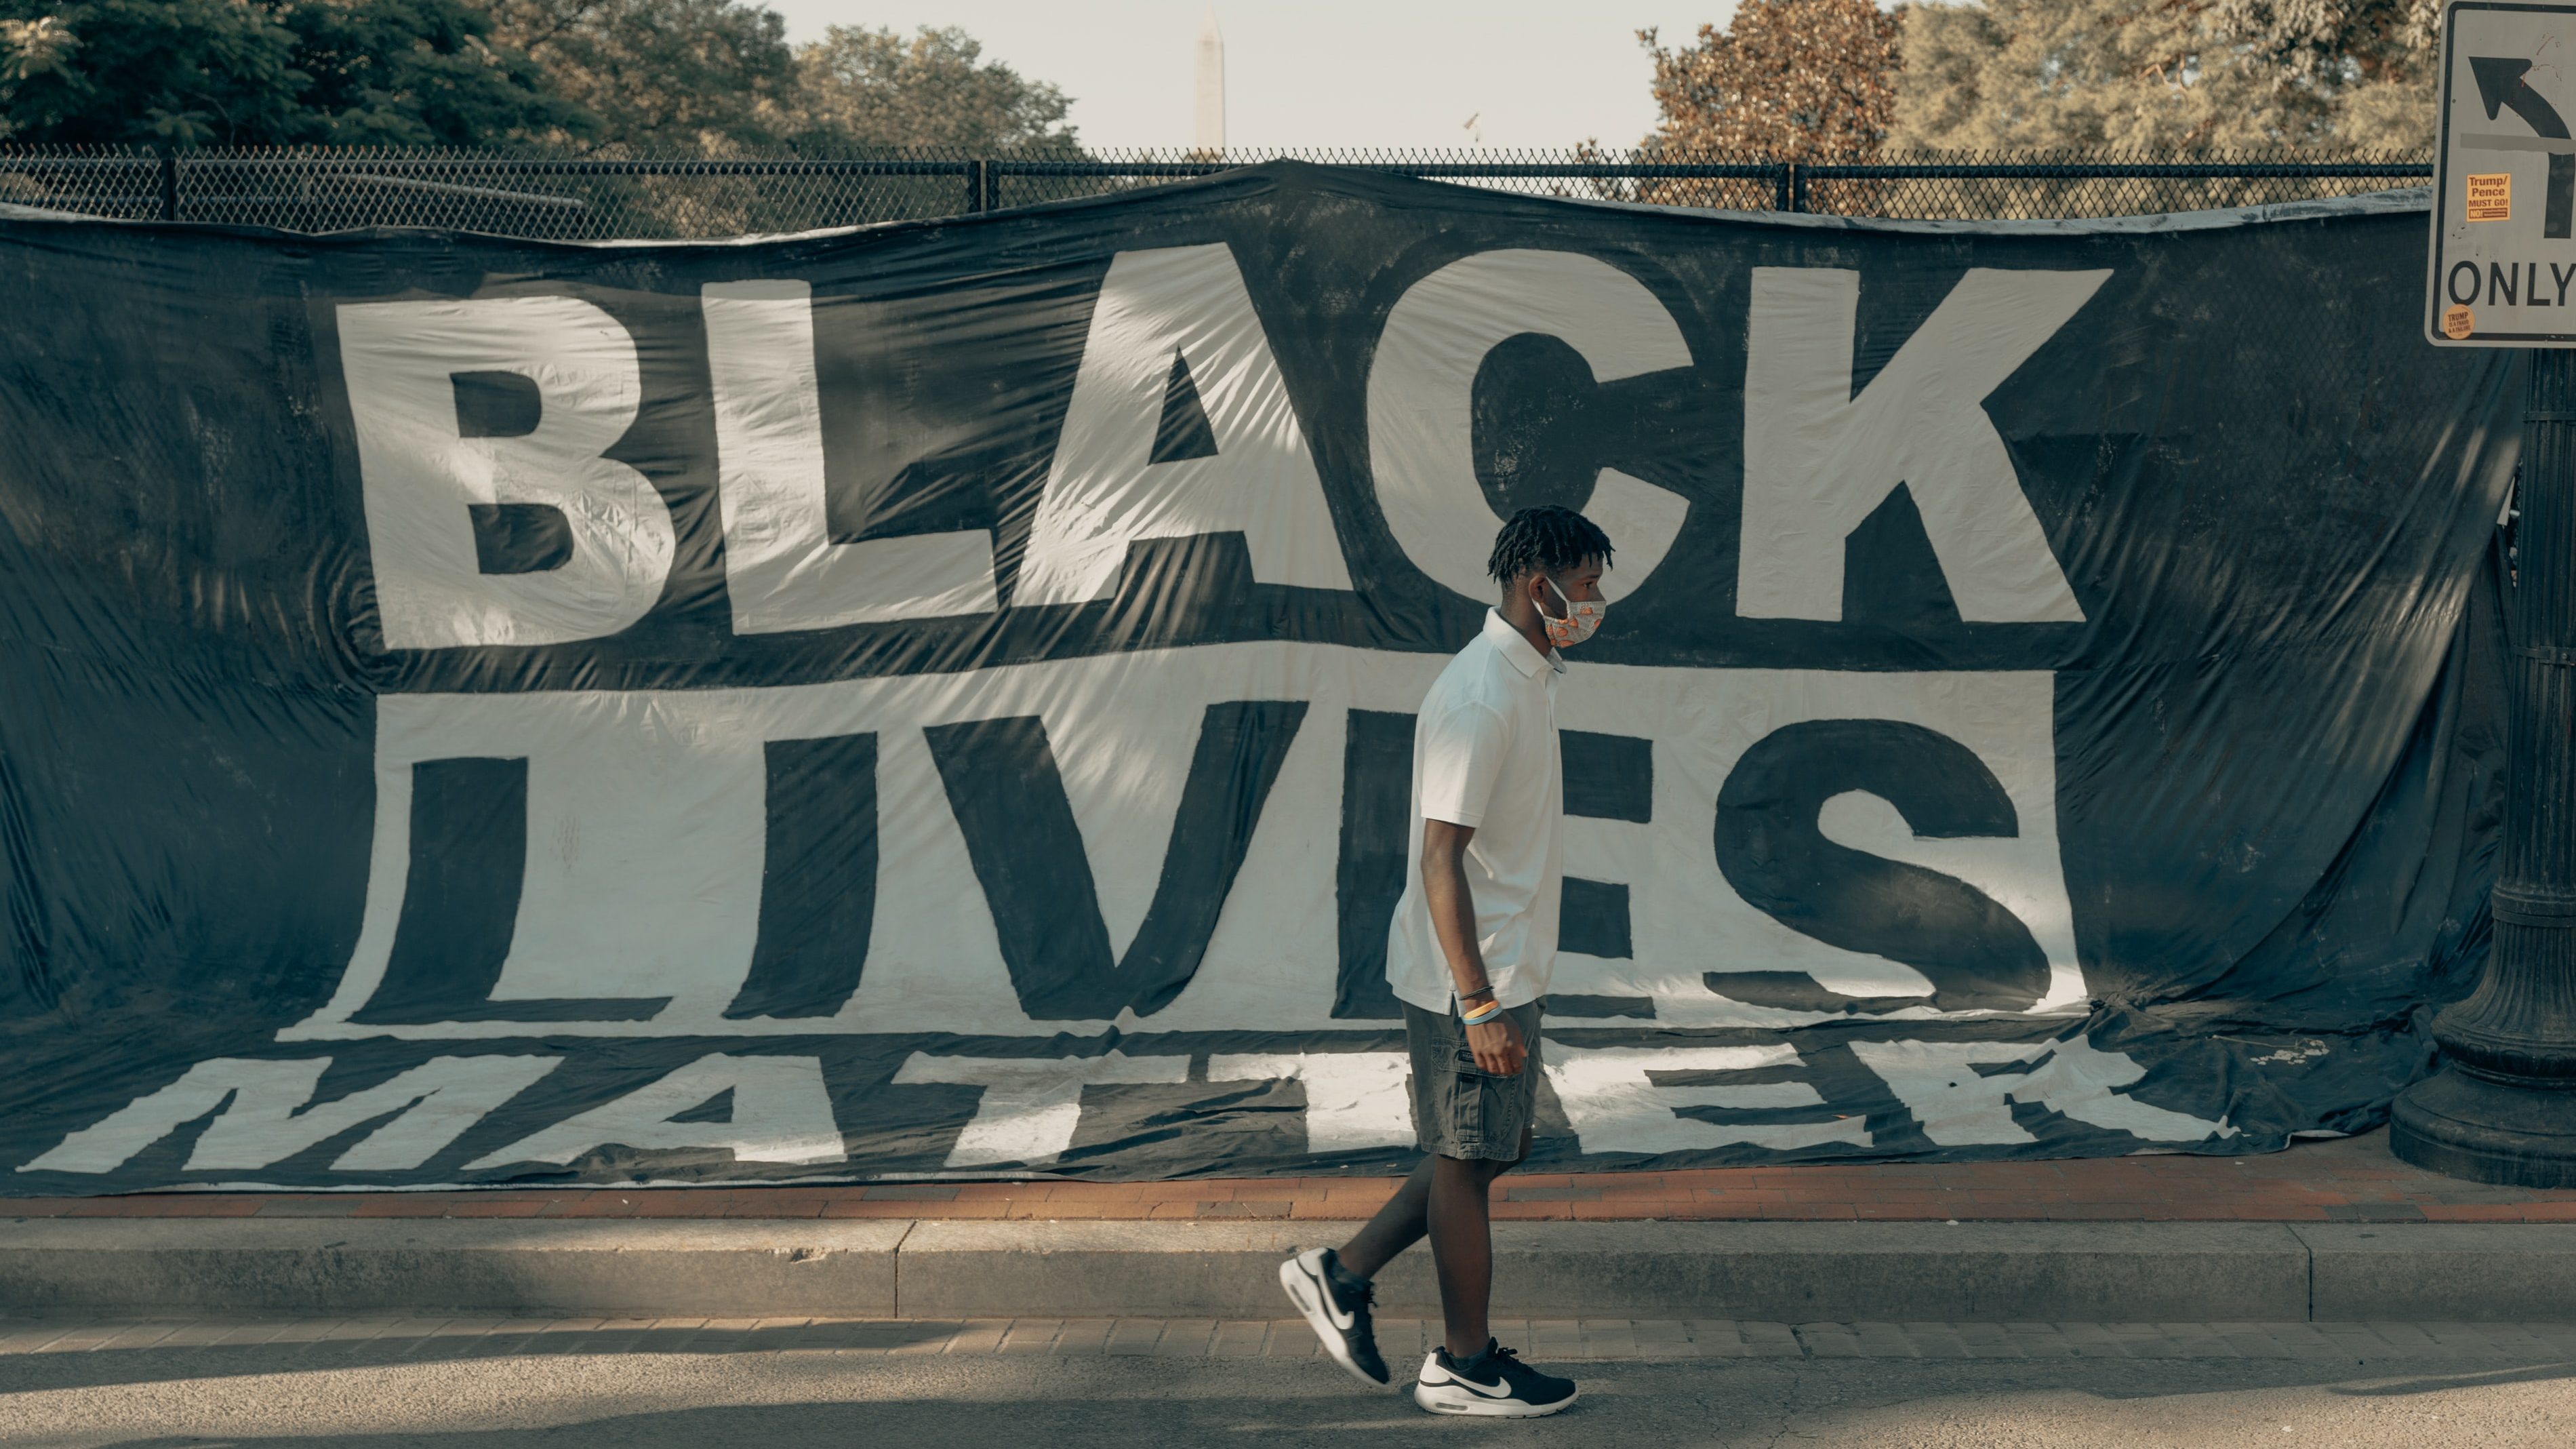 Young black man in shorts and sneakers walks in front of a large Black Lives Matter banner on a fence in Washington, DC. Photo by Clay Banks.